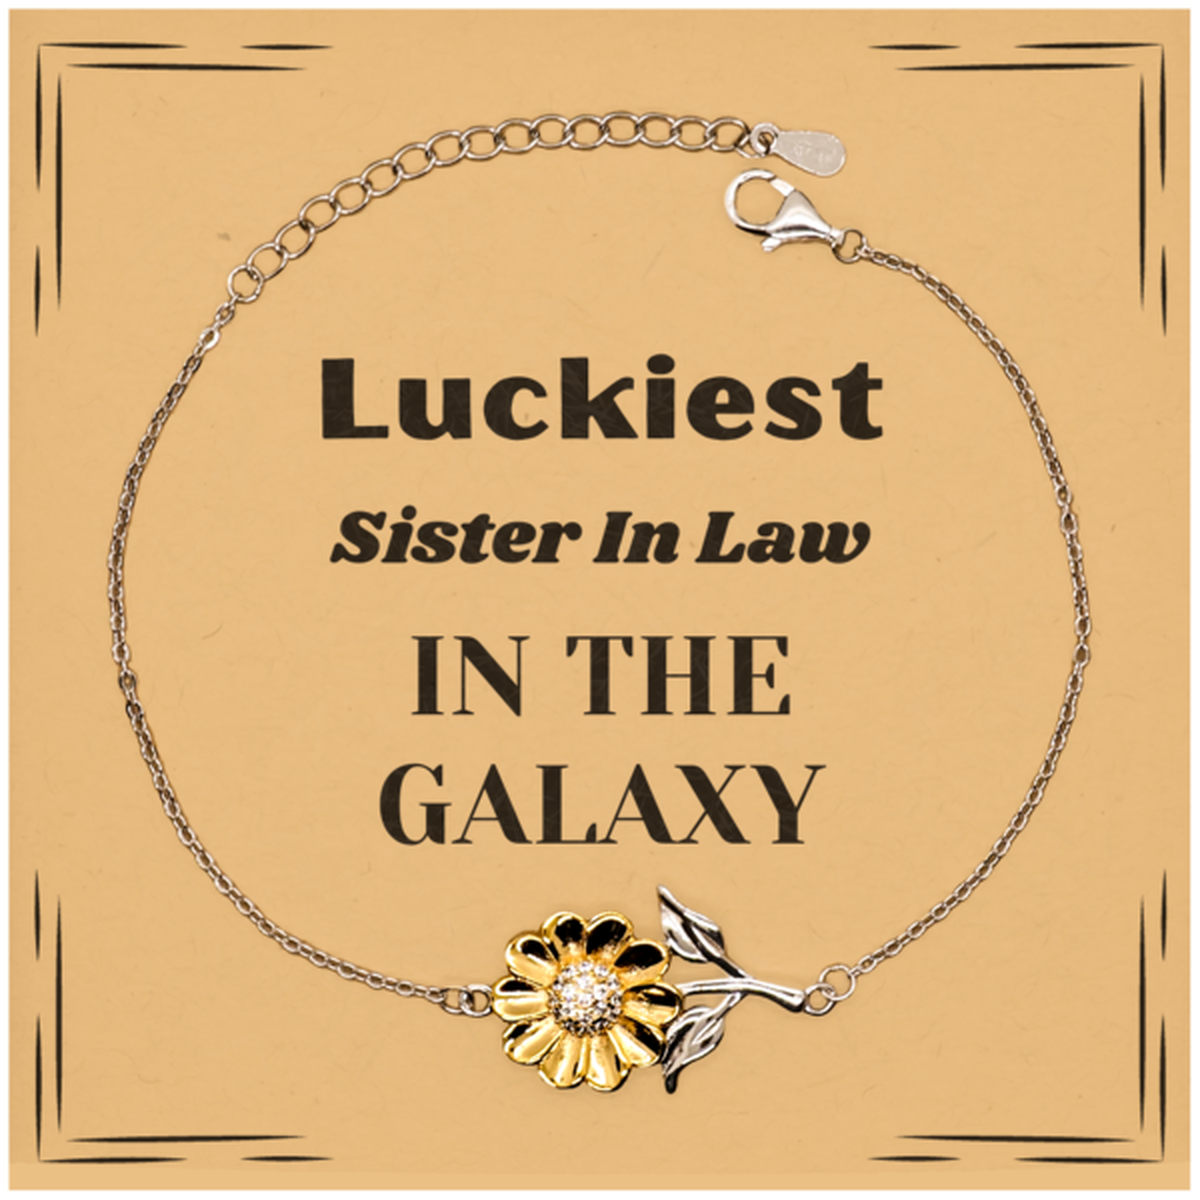 Luckiest Sister In Law in the Galaxy, To My Sister In Law Message Card Gifts, Christmas Sister In Law Sunflower Bracelet Gifts, X-mas Birthday Unique Gifts For Sister In Law Men Women